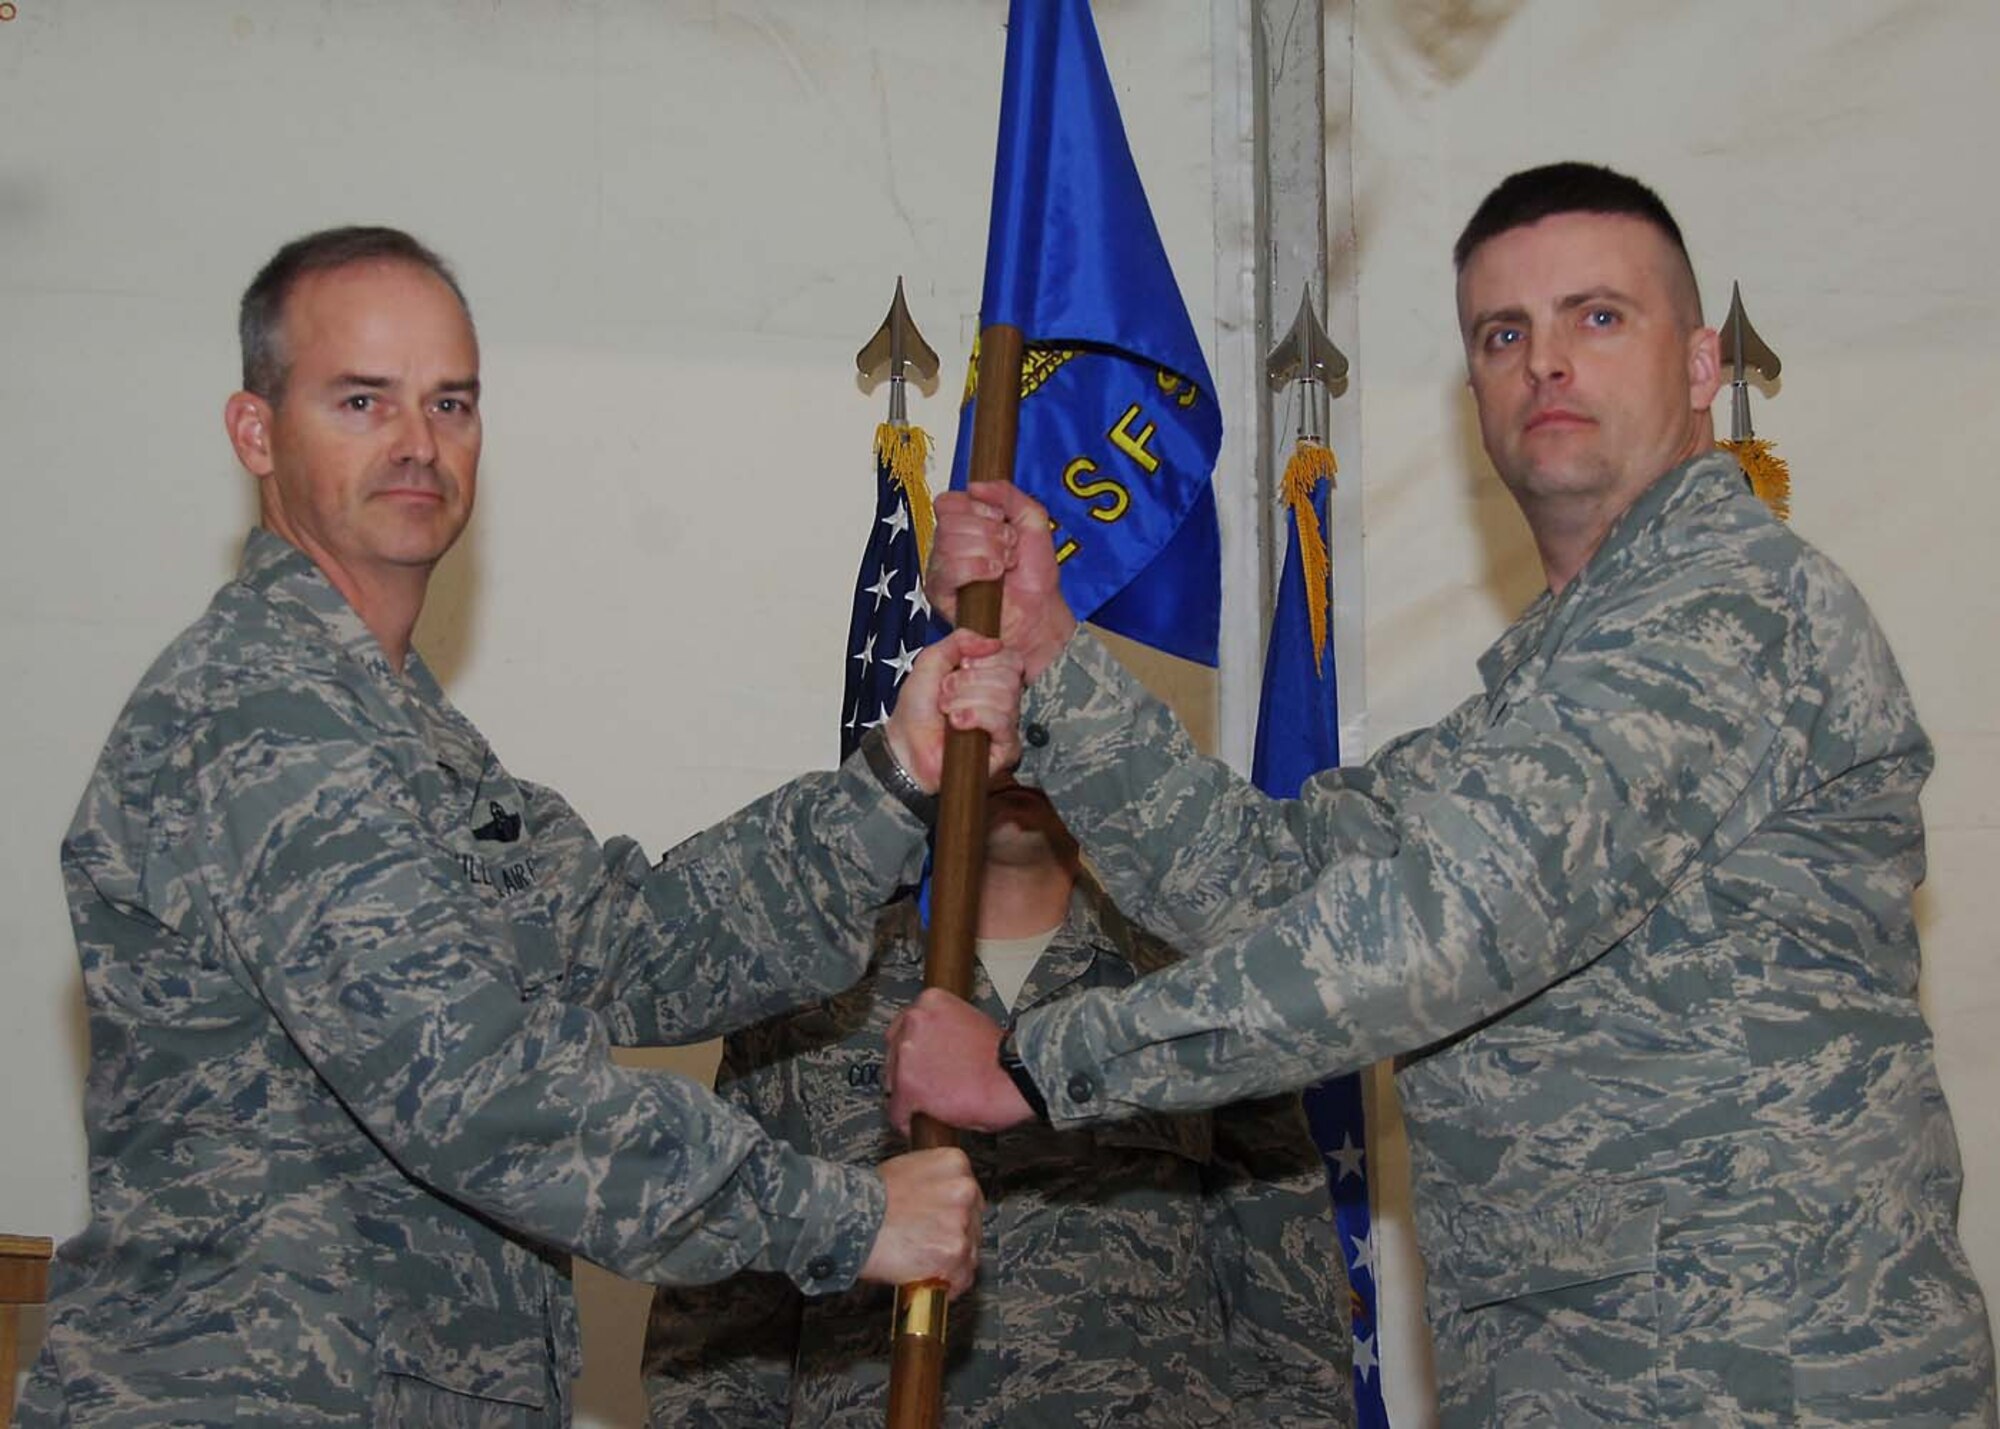 SOUTHWEST ASIA -- Maj. Jeffery Becker, 387th Expeditionary Security Forces Squadron commander, receives command of the 387th ESFS from Col. John Sullivan, 387th Air Expeditionary Group commander, at an air base in Southwest Asia, Feb. 23. Major Becker is currently deployed from Keesler AFB, Miss. (U.S. Air Force photo/Senior Airman Courtney Richardson)